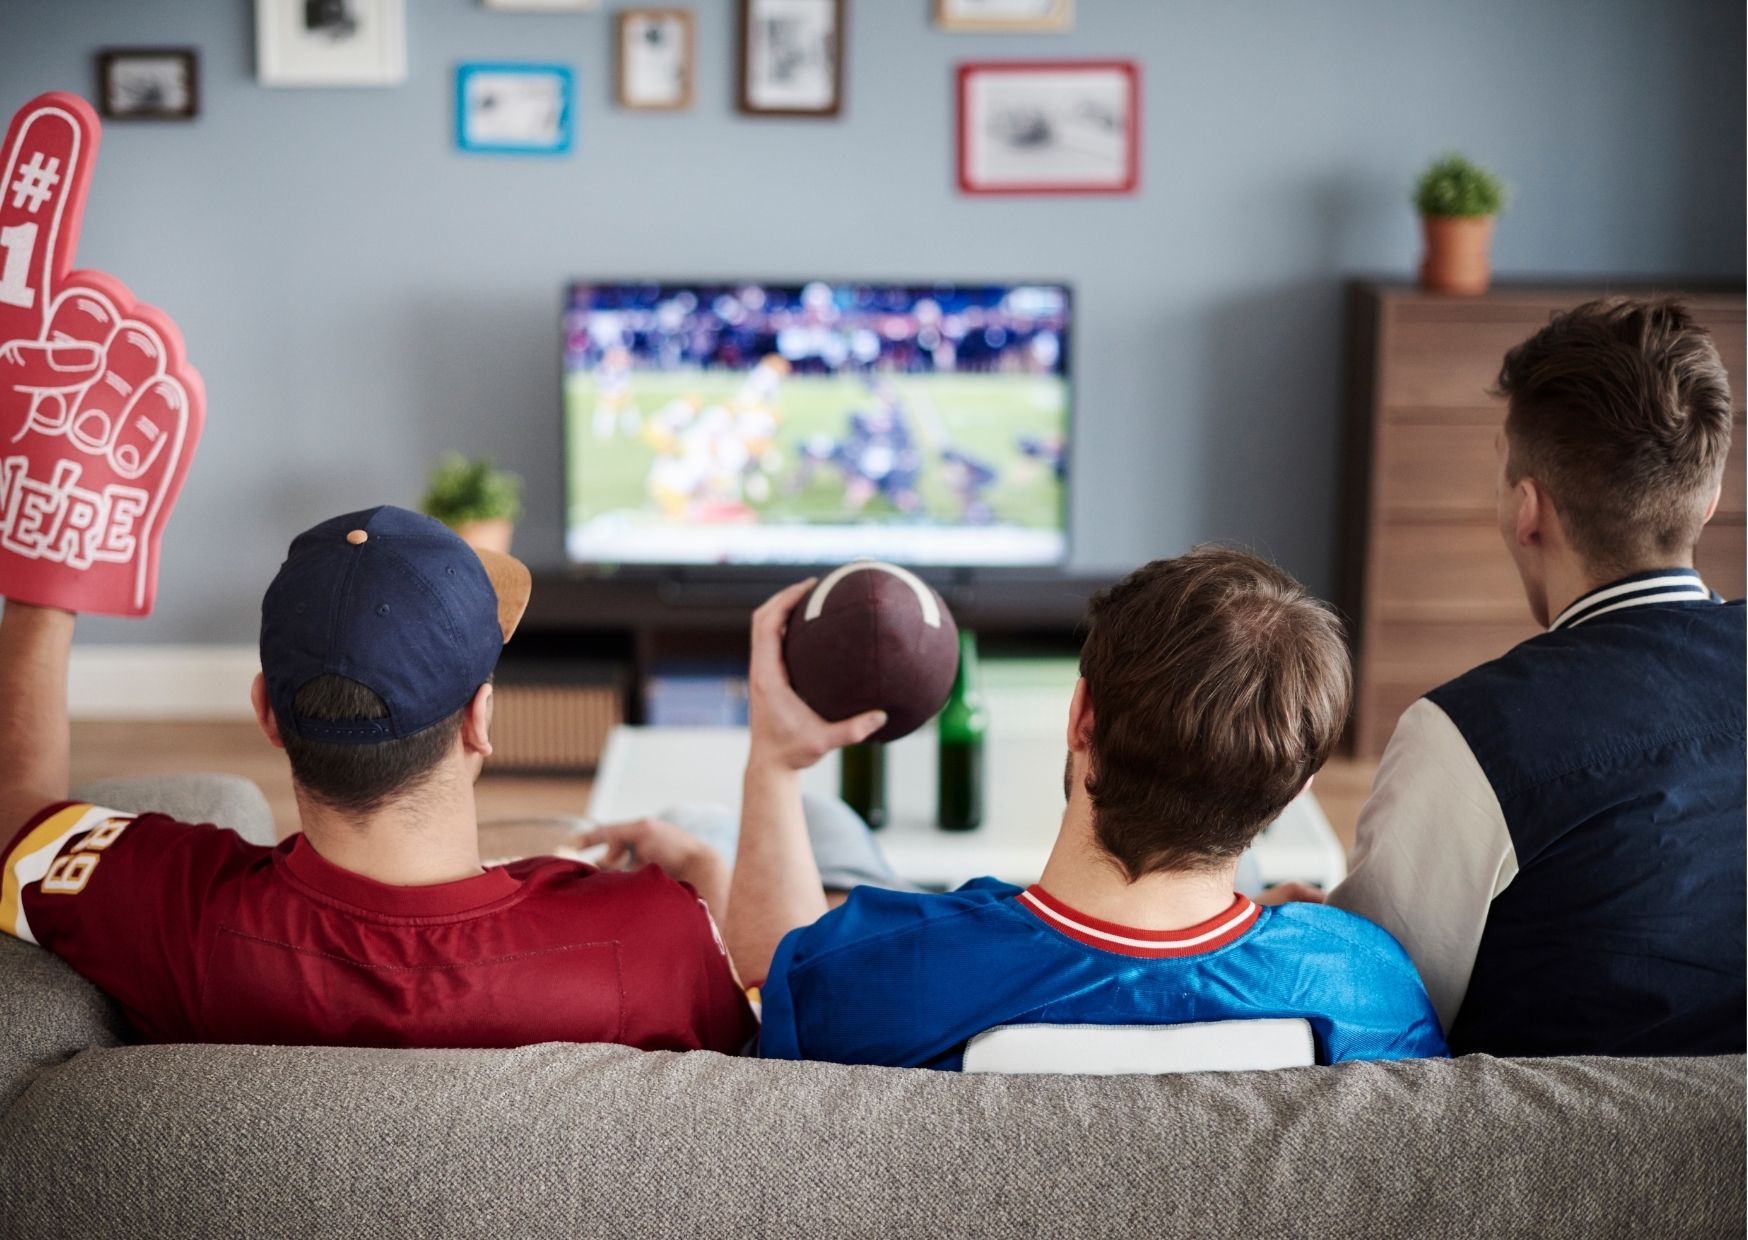 7 Tips to Get Ready for the Super Bowl Gametime